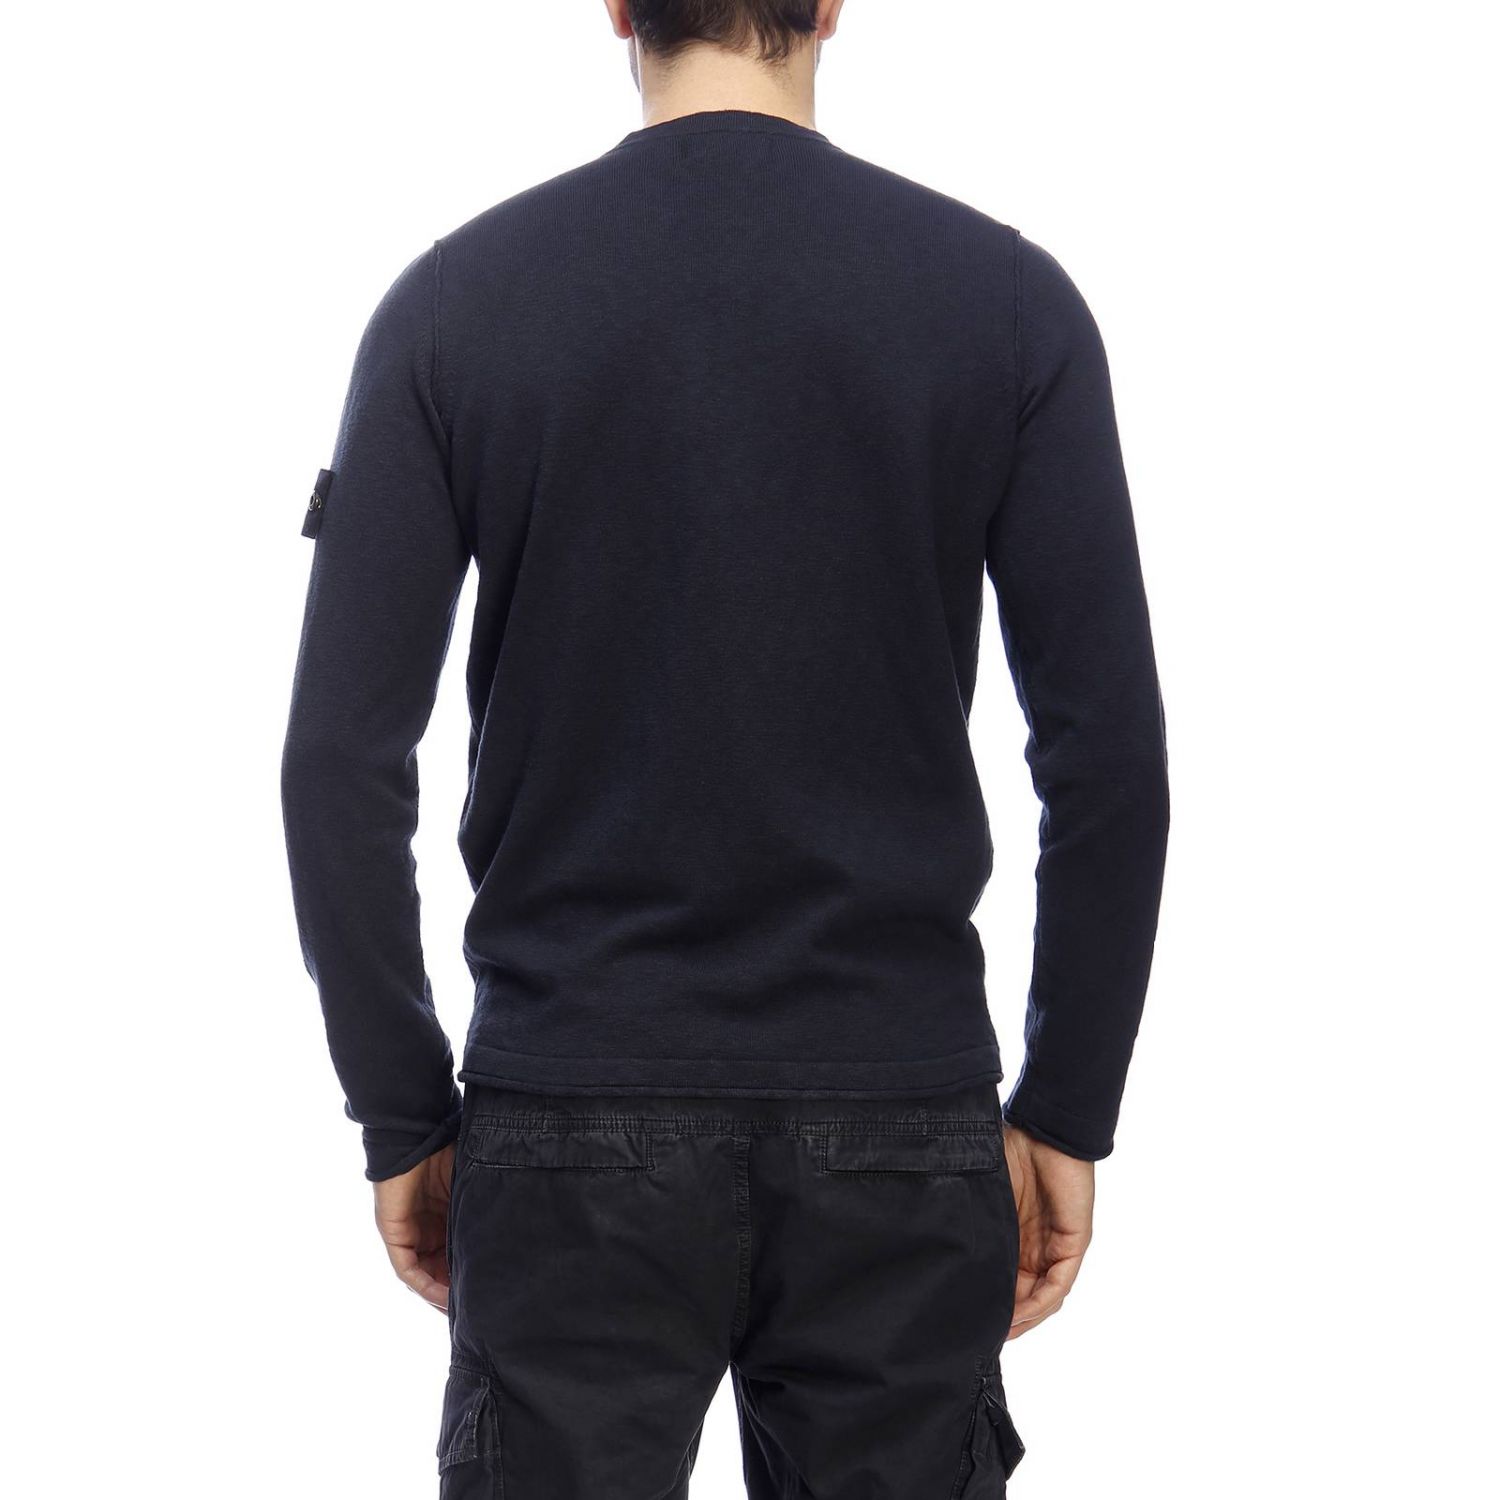 Stone Island Outlet: sweater for man - Navy | Stone Island sweater ...